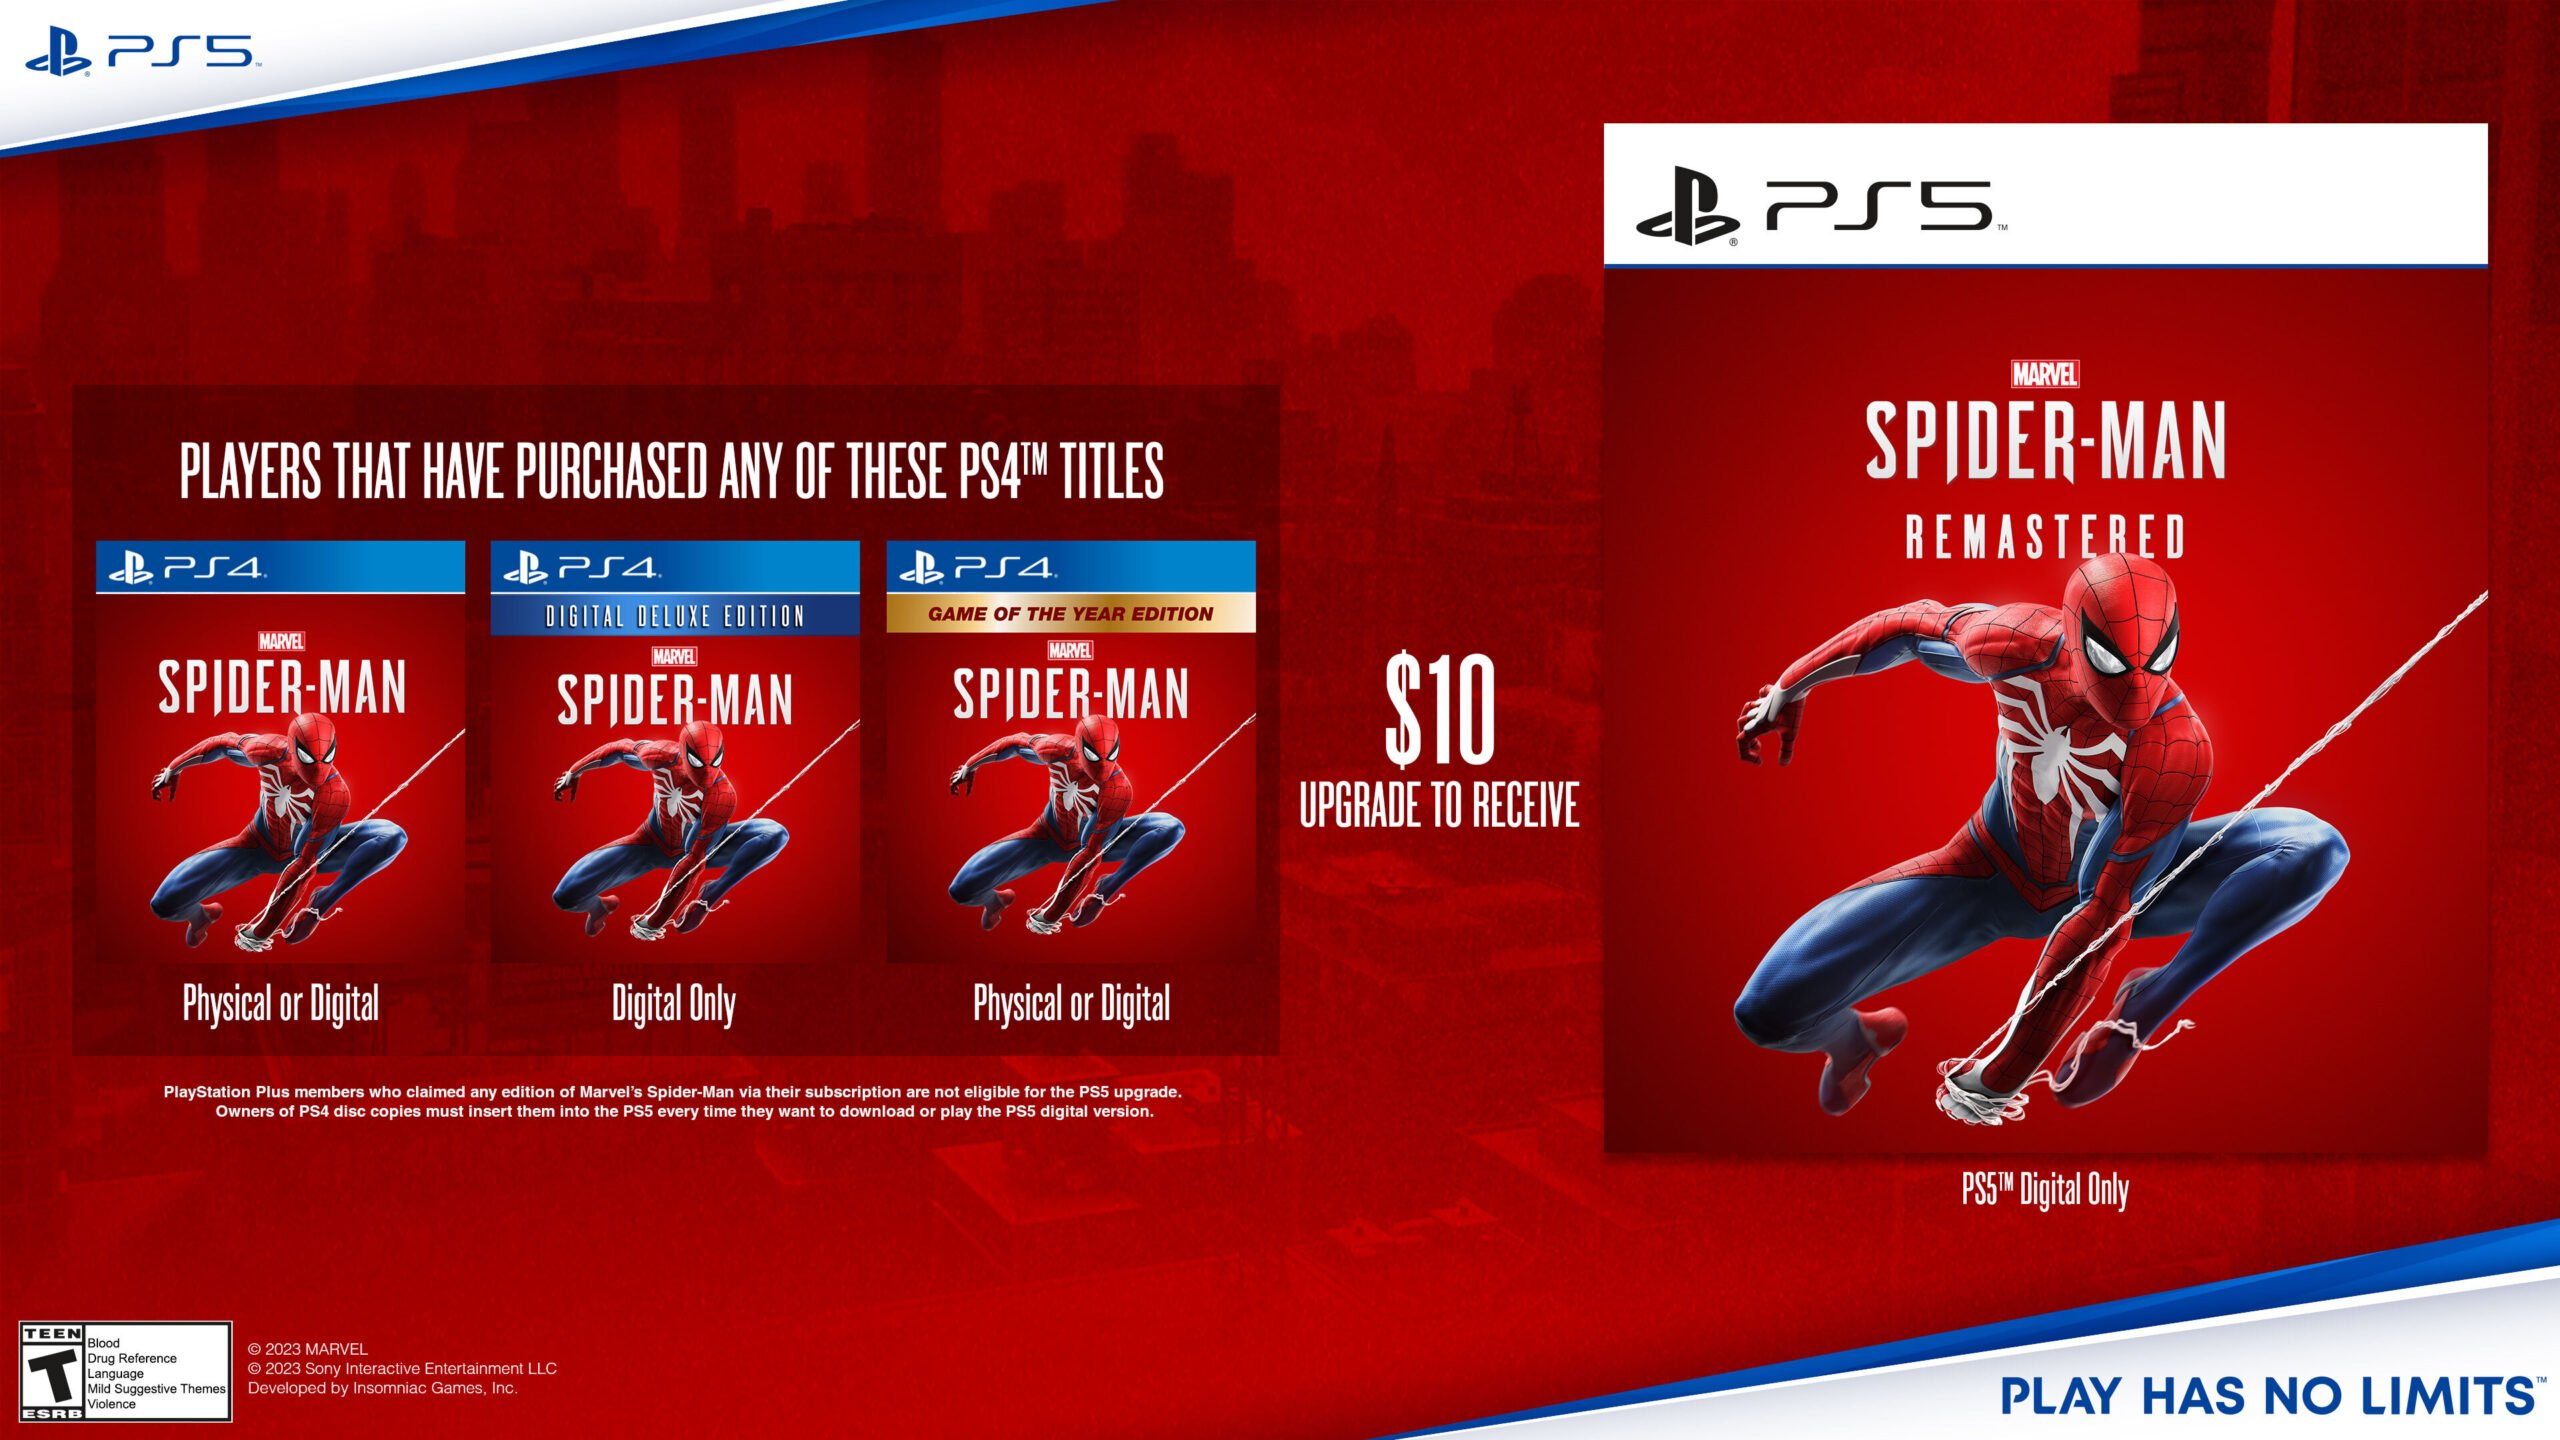 Wario64 on X: Marvel's Spider-Man Remastered (PS5) will finally be  available to purchase on PSN later this month as a standalone game. $10  upgrade if you own the original Marvel's Spider-Man. MSRP